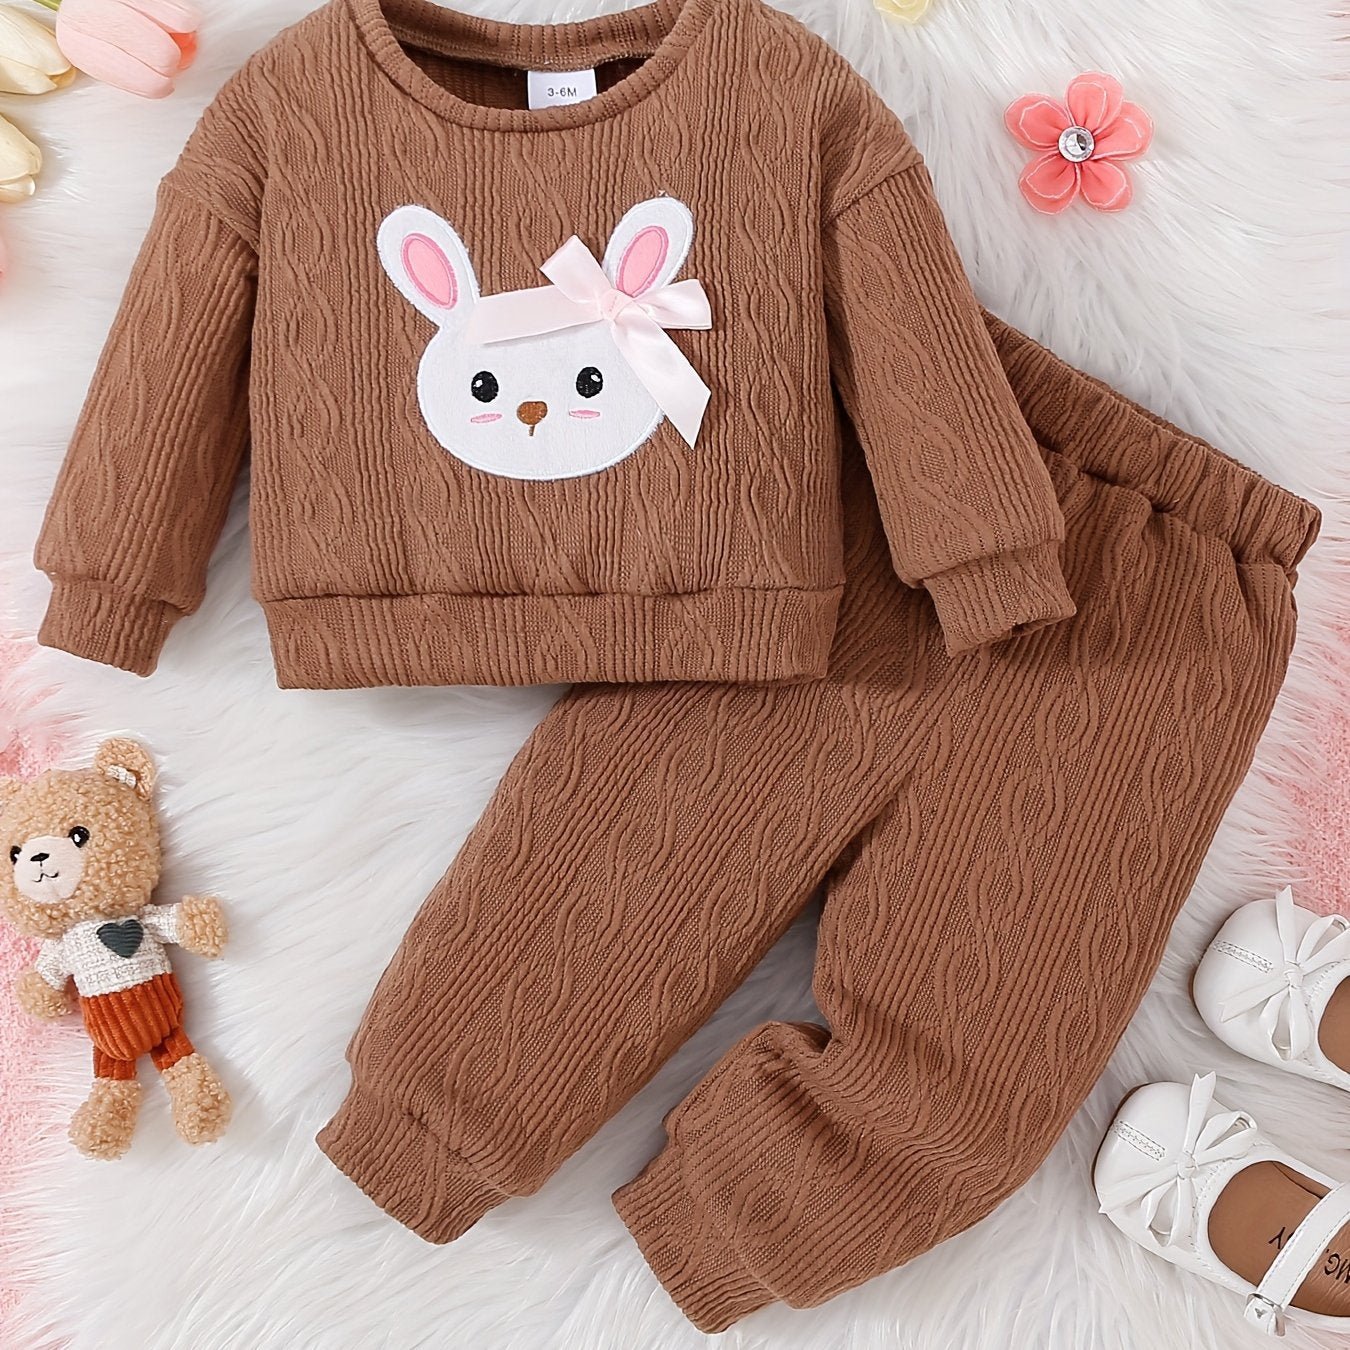 Adorable Toddler Baby Girls Bunny Print Sweatshirt Top & Coordinated Trousers Set - Comfy Casual Outfit for Playful Daily Wear - Ammpoure Wellbeing